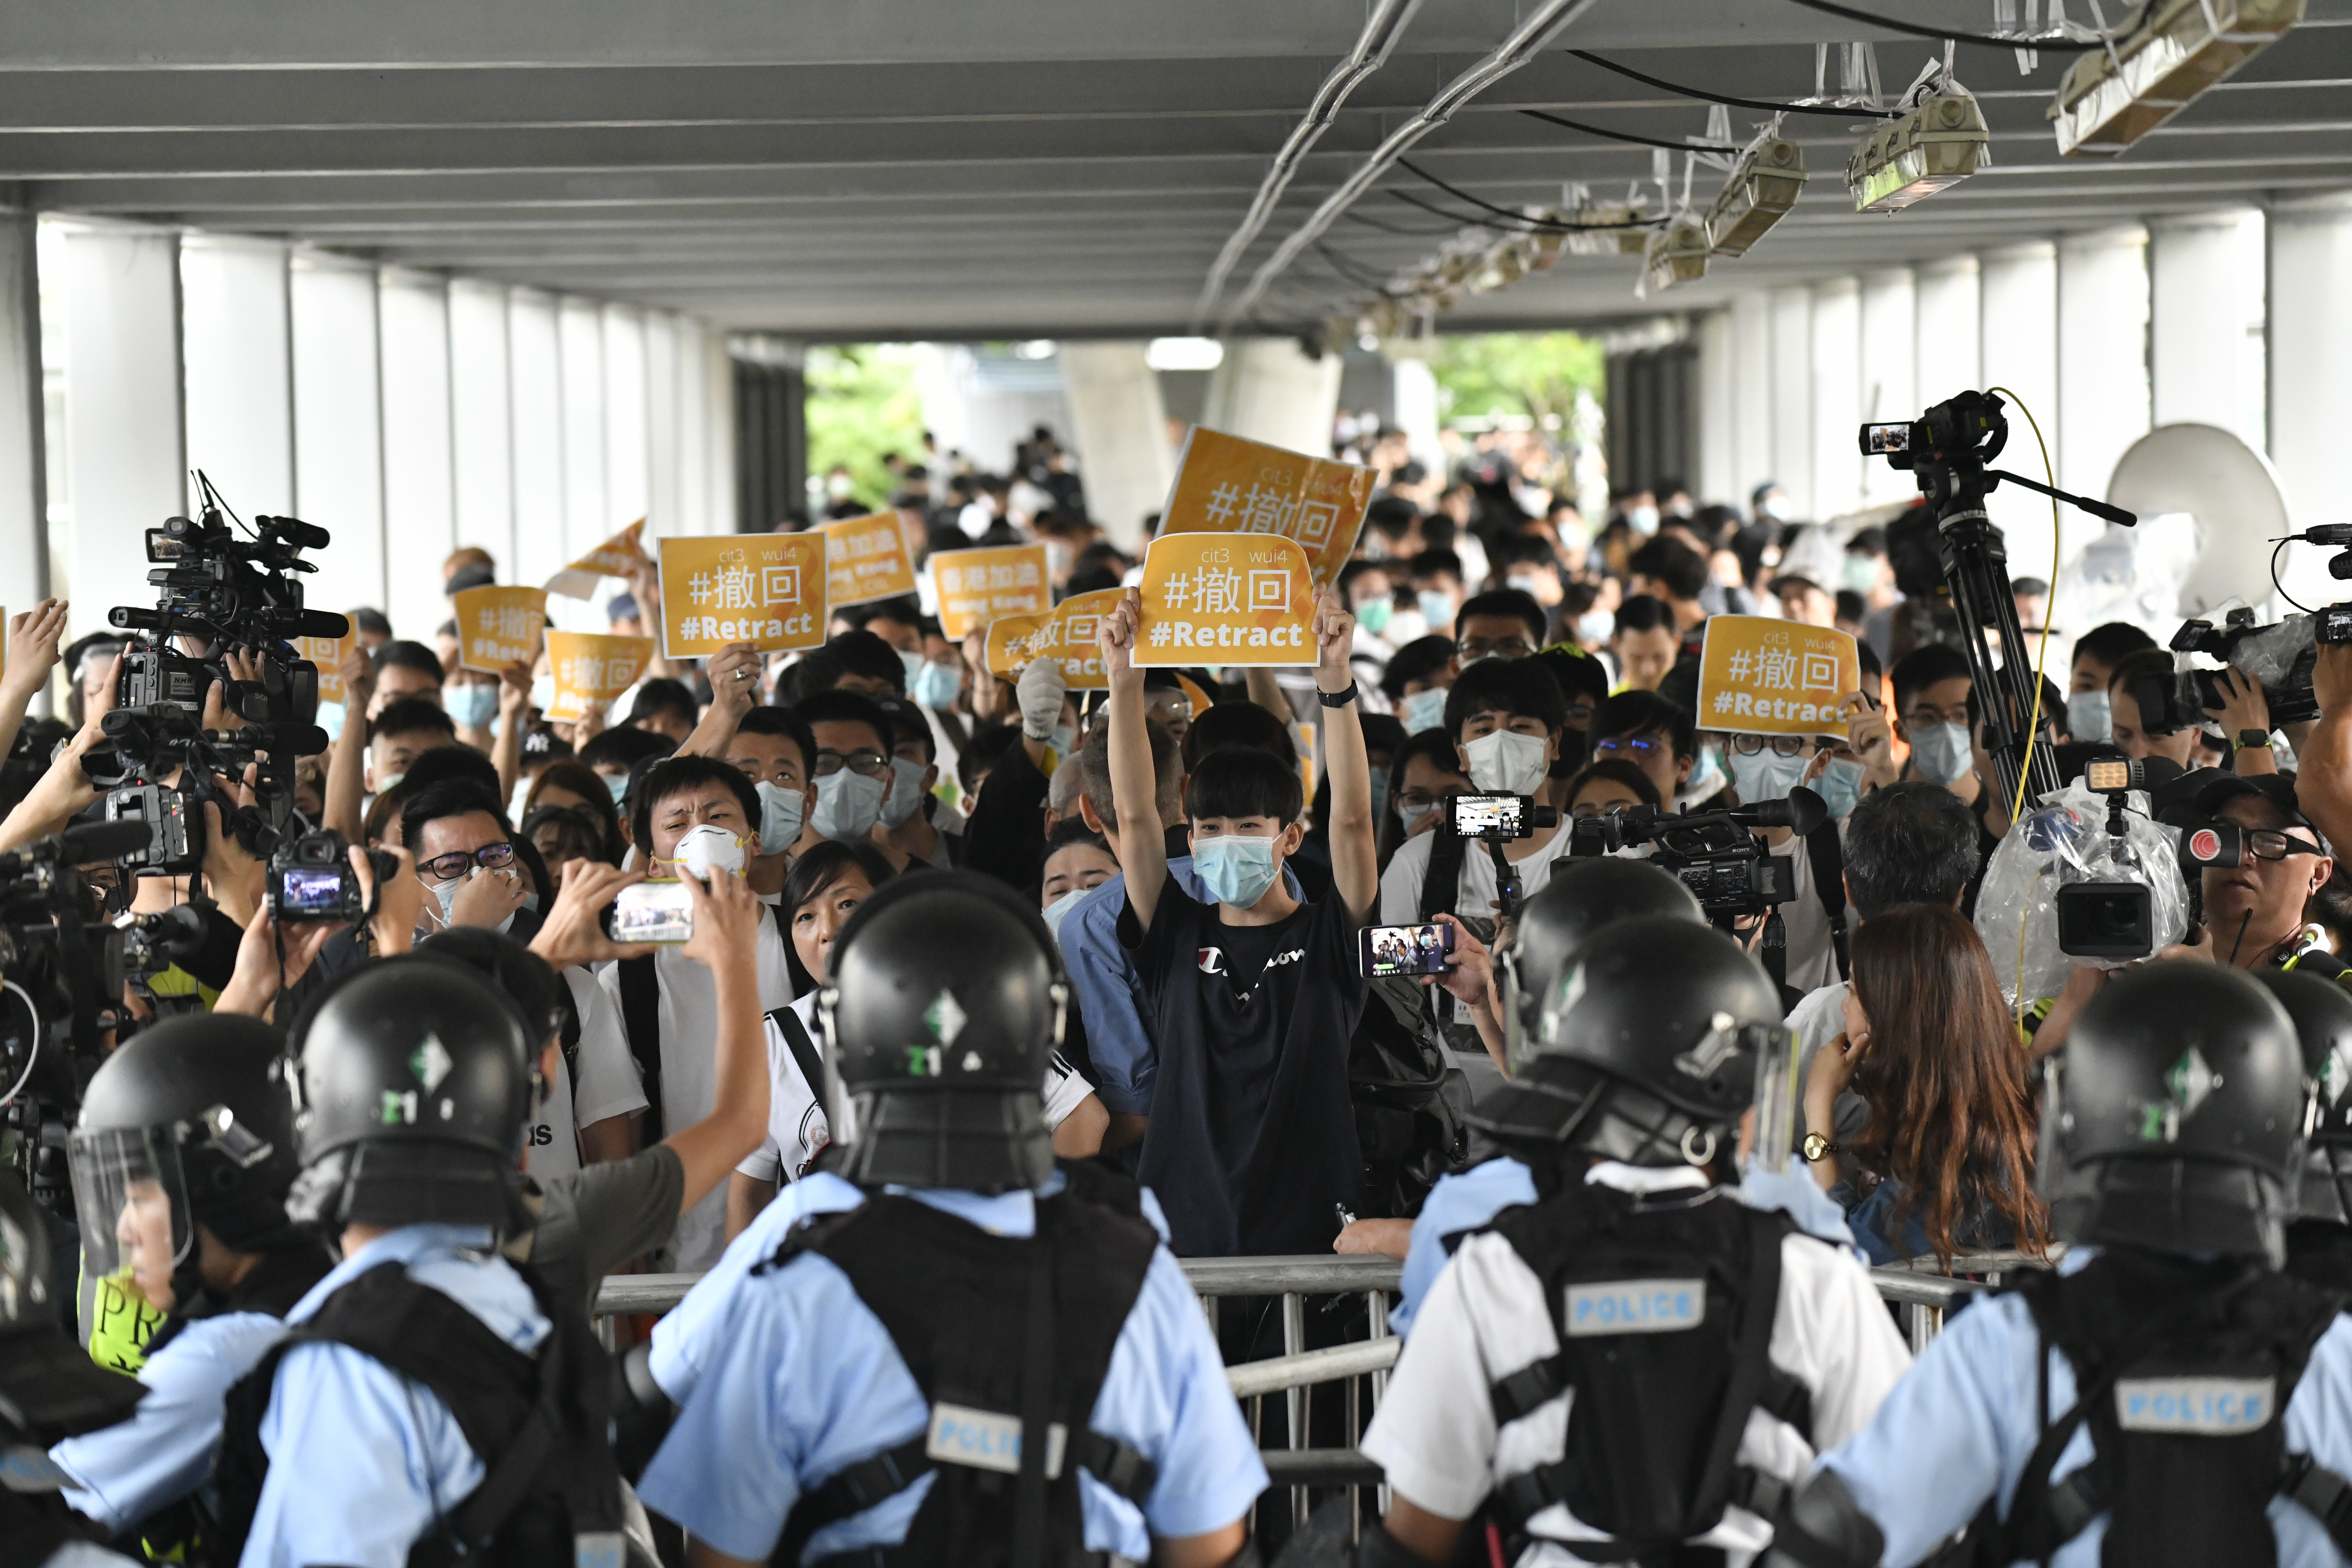 epa07645149 Protesters holds signs in front of police officers a day after a violent protest against an extradition law in Hong Kong, China, 13 June 2019. The Hong Kong Legislative Council on 13 June postponed for the second consecutive day a debate on a controversial extradition bill in the aftermath of violent clashes where riot police fired rubber bullets, tear gas and pepper spray at protesters.  EPA/EDWIN KWOK